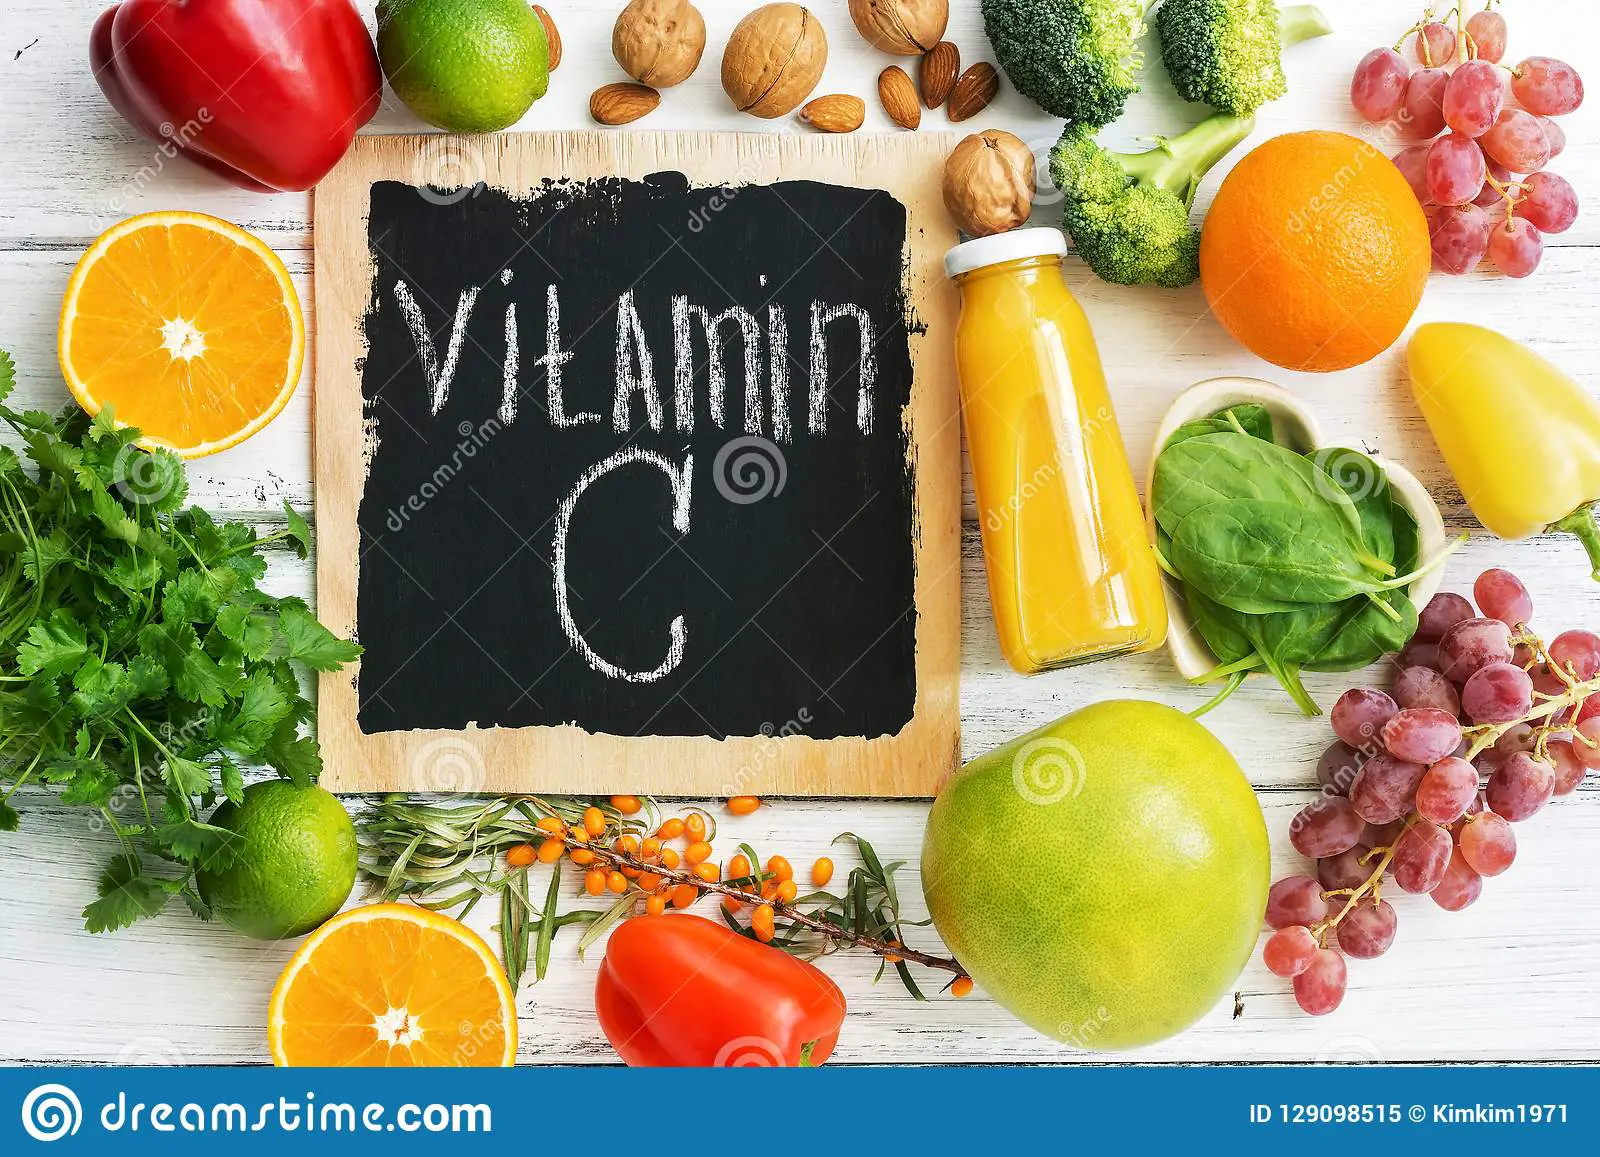 Fruits And Vegetables With Vitamin C. Healthy Food High In ...